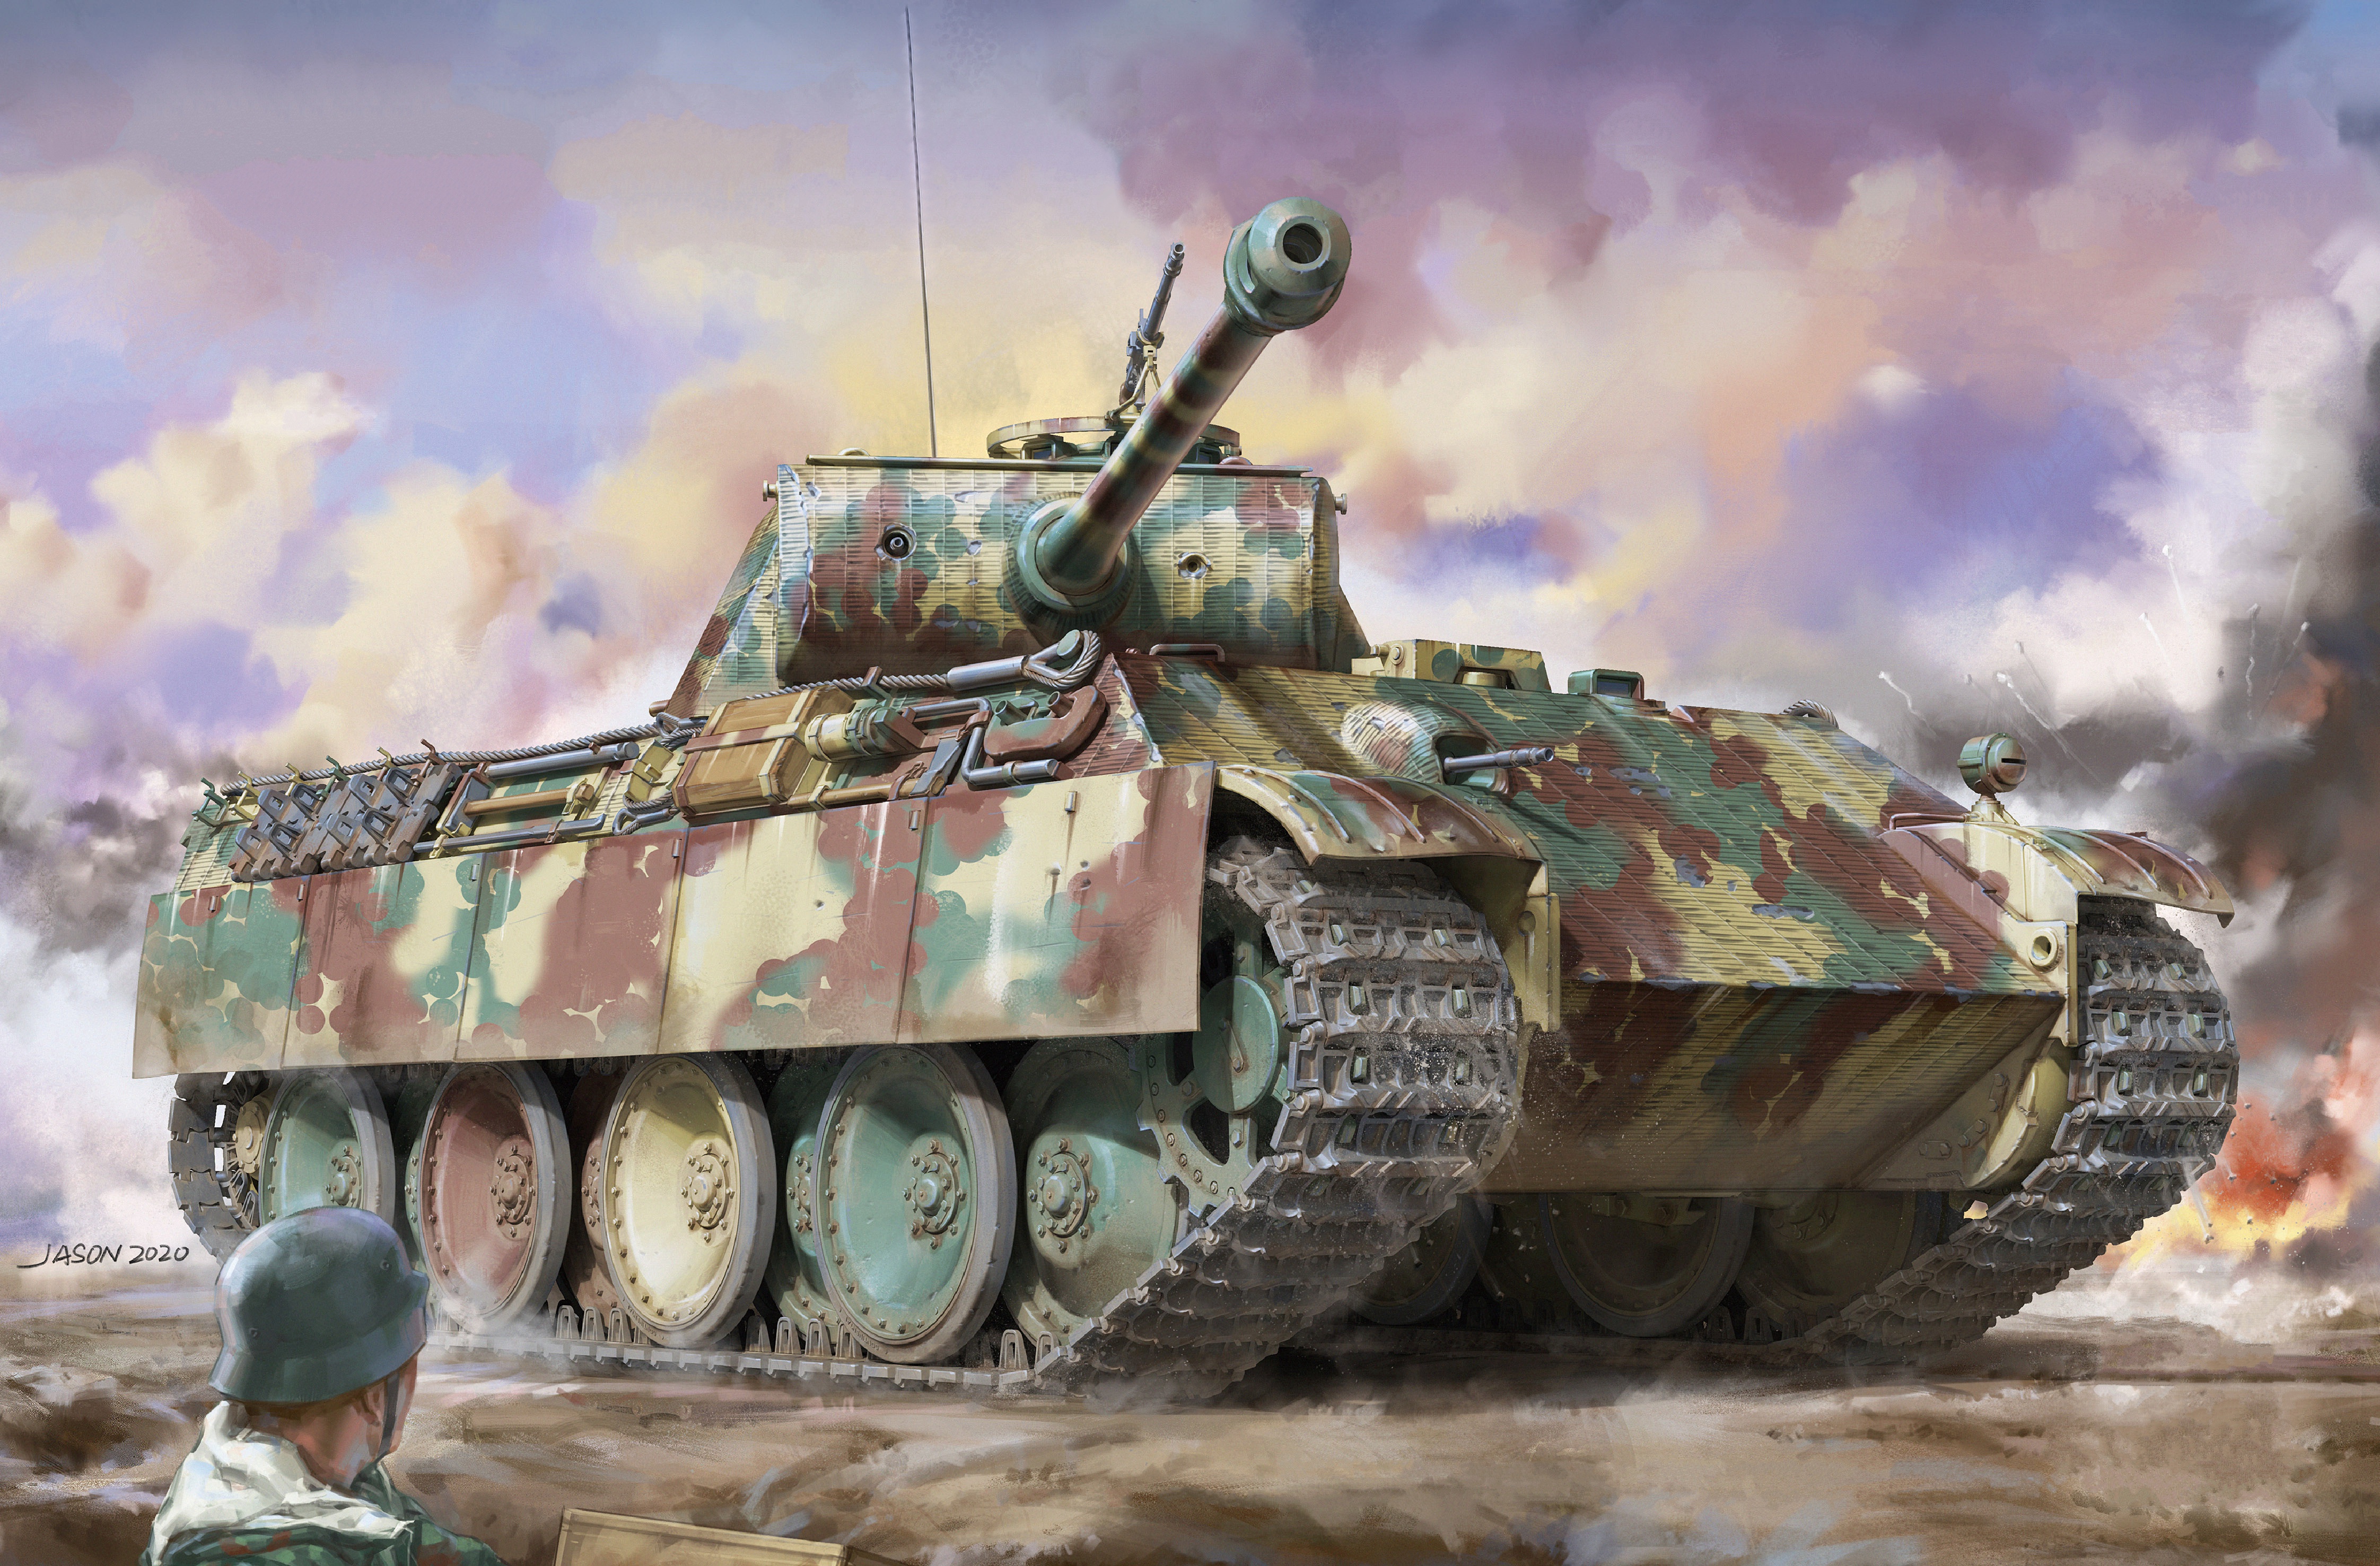 Military Panther Tank HD Wallpaper | Background Image